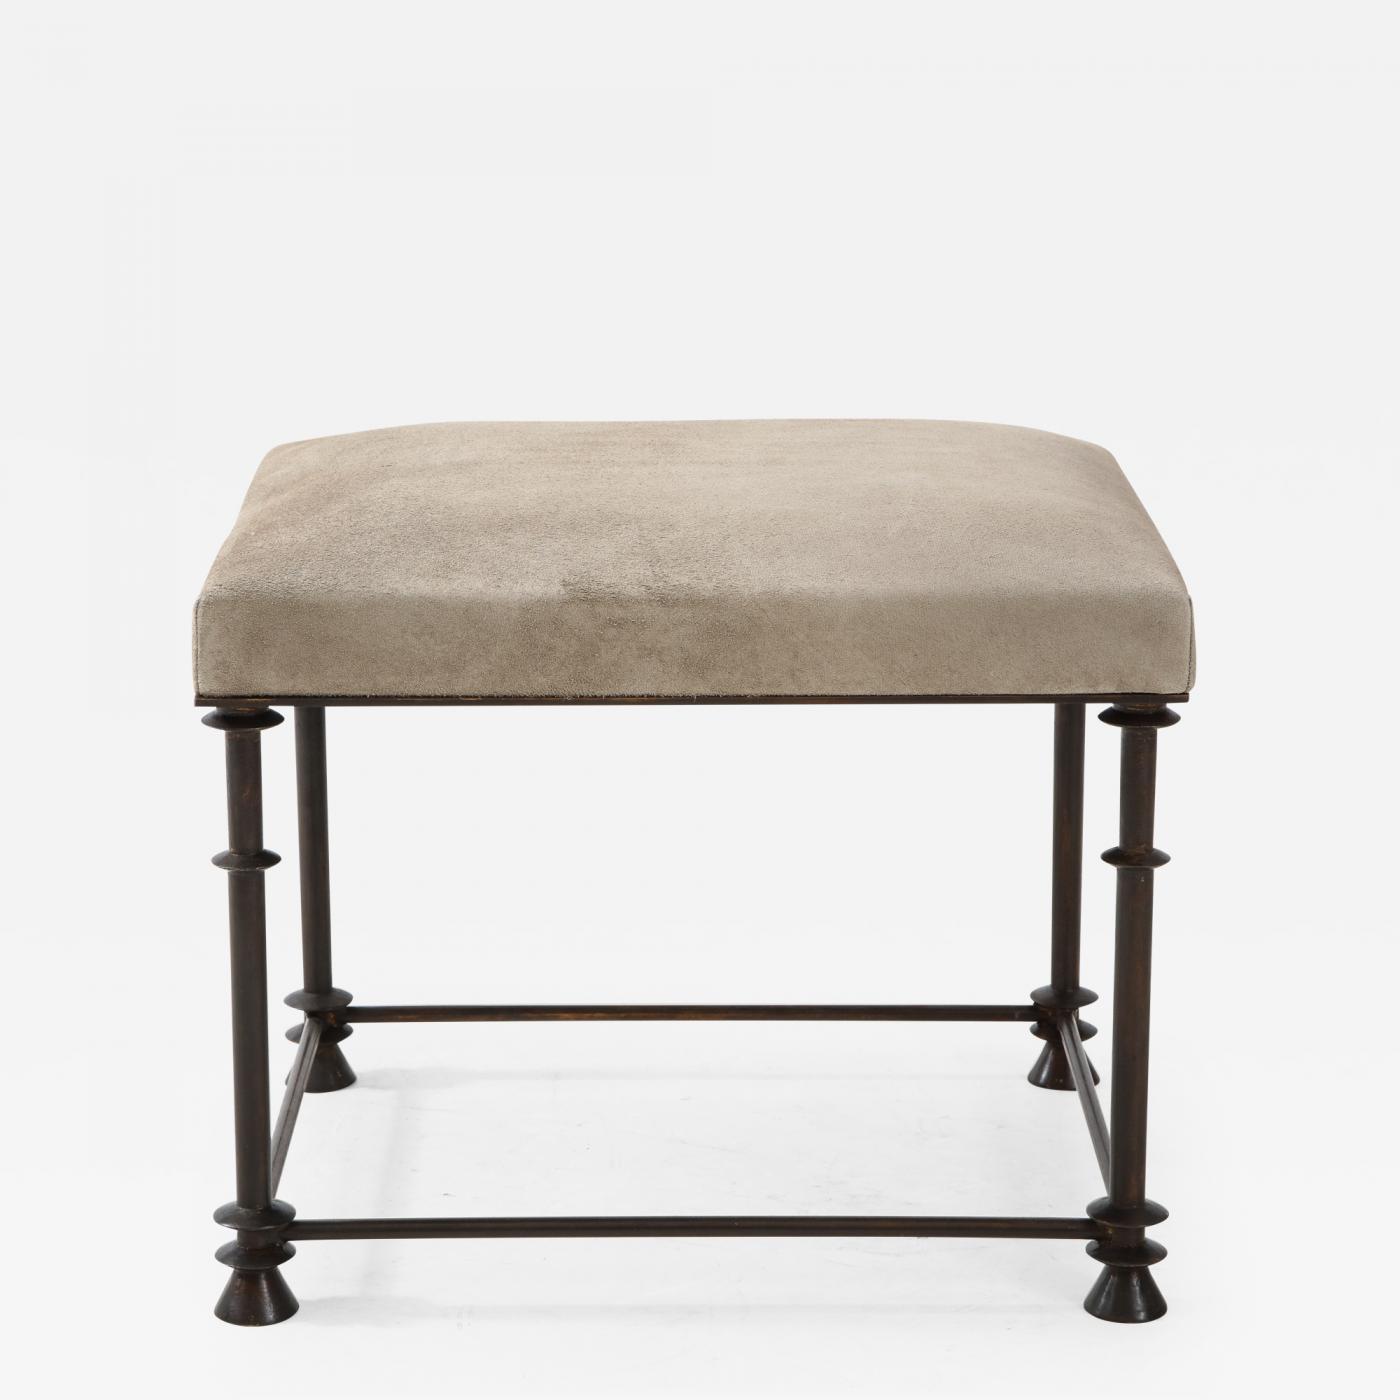 An elegant bronze stool covered with 